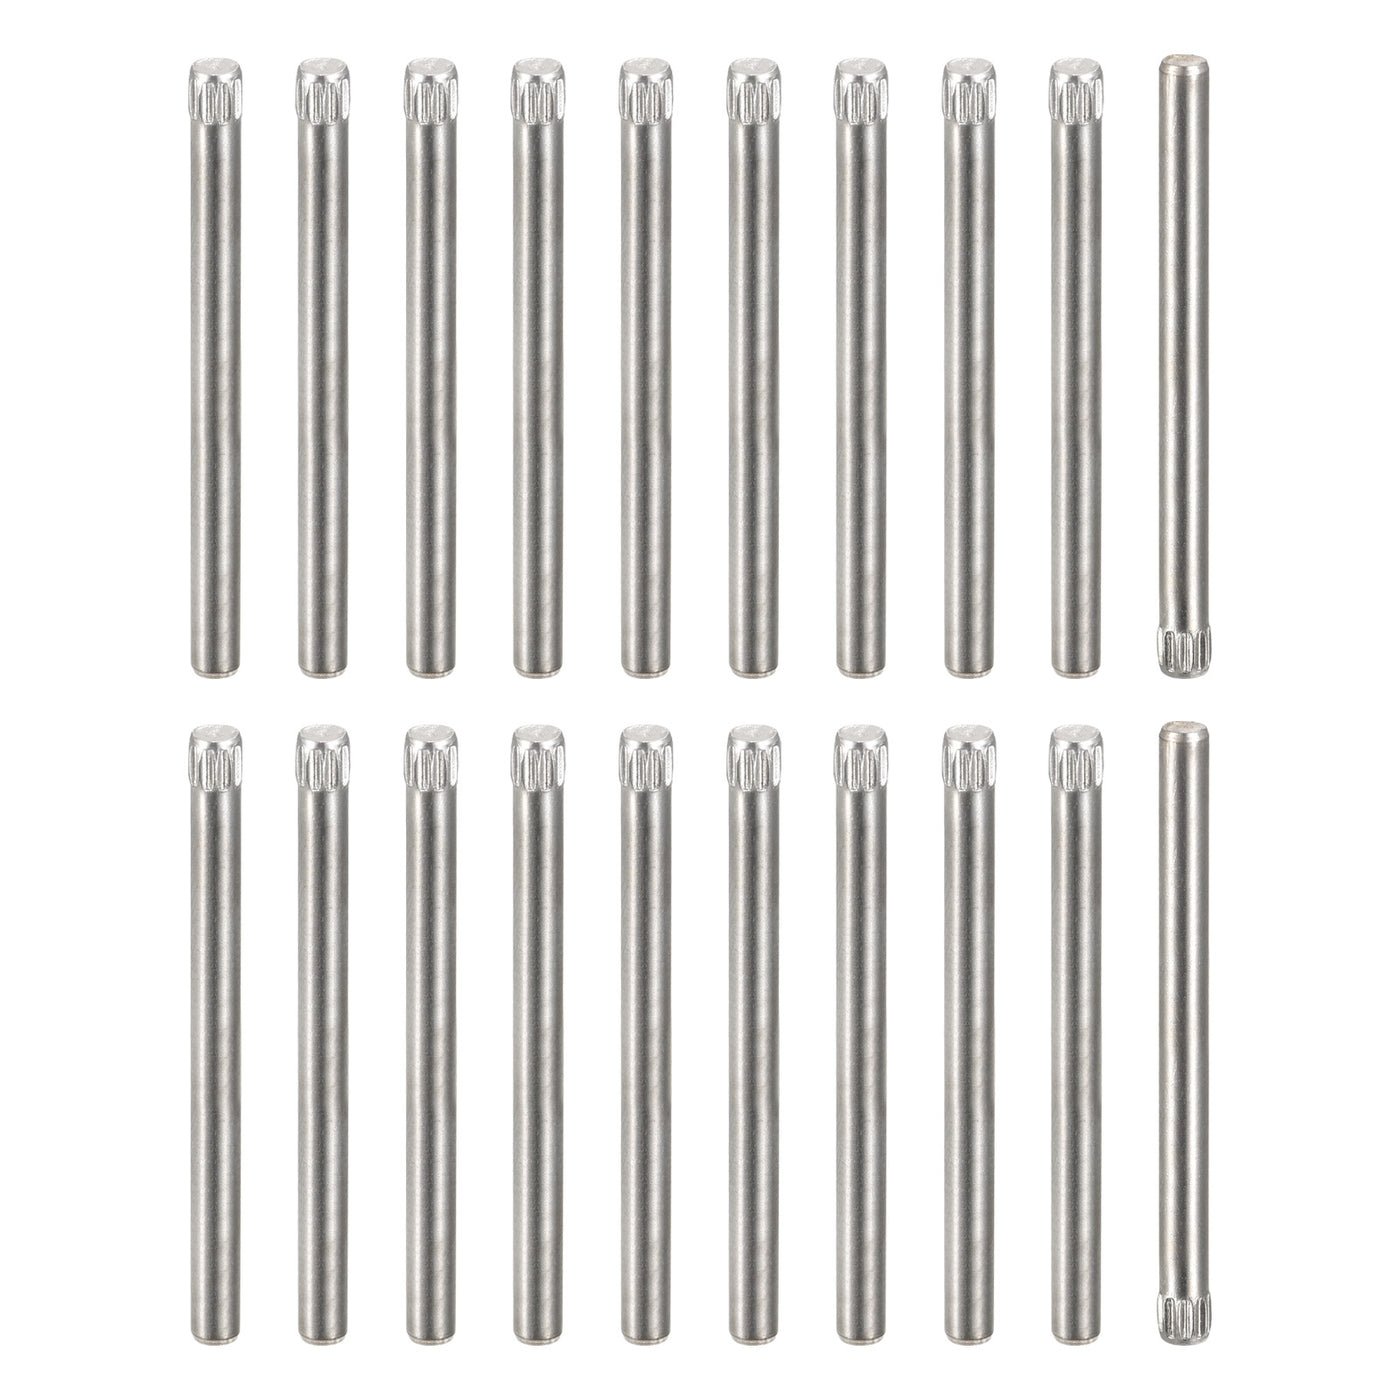 uxcell Uxcell 3x40mm 304 Stainless Steel Dowel Pins, 50Pcs Knurled Head Flat End Dowel Pin